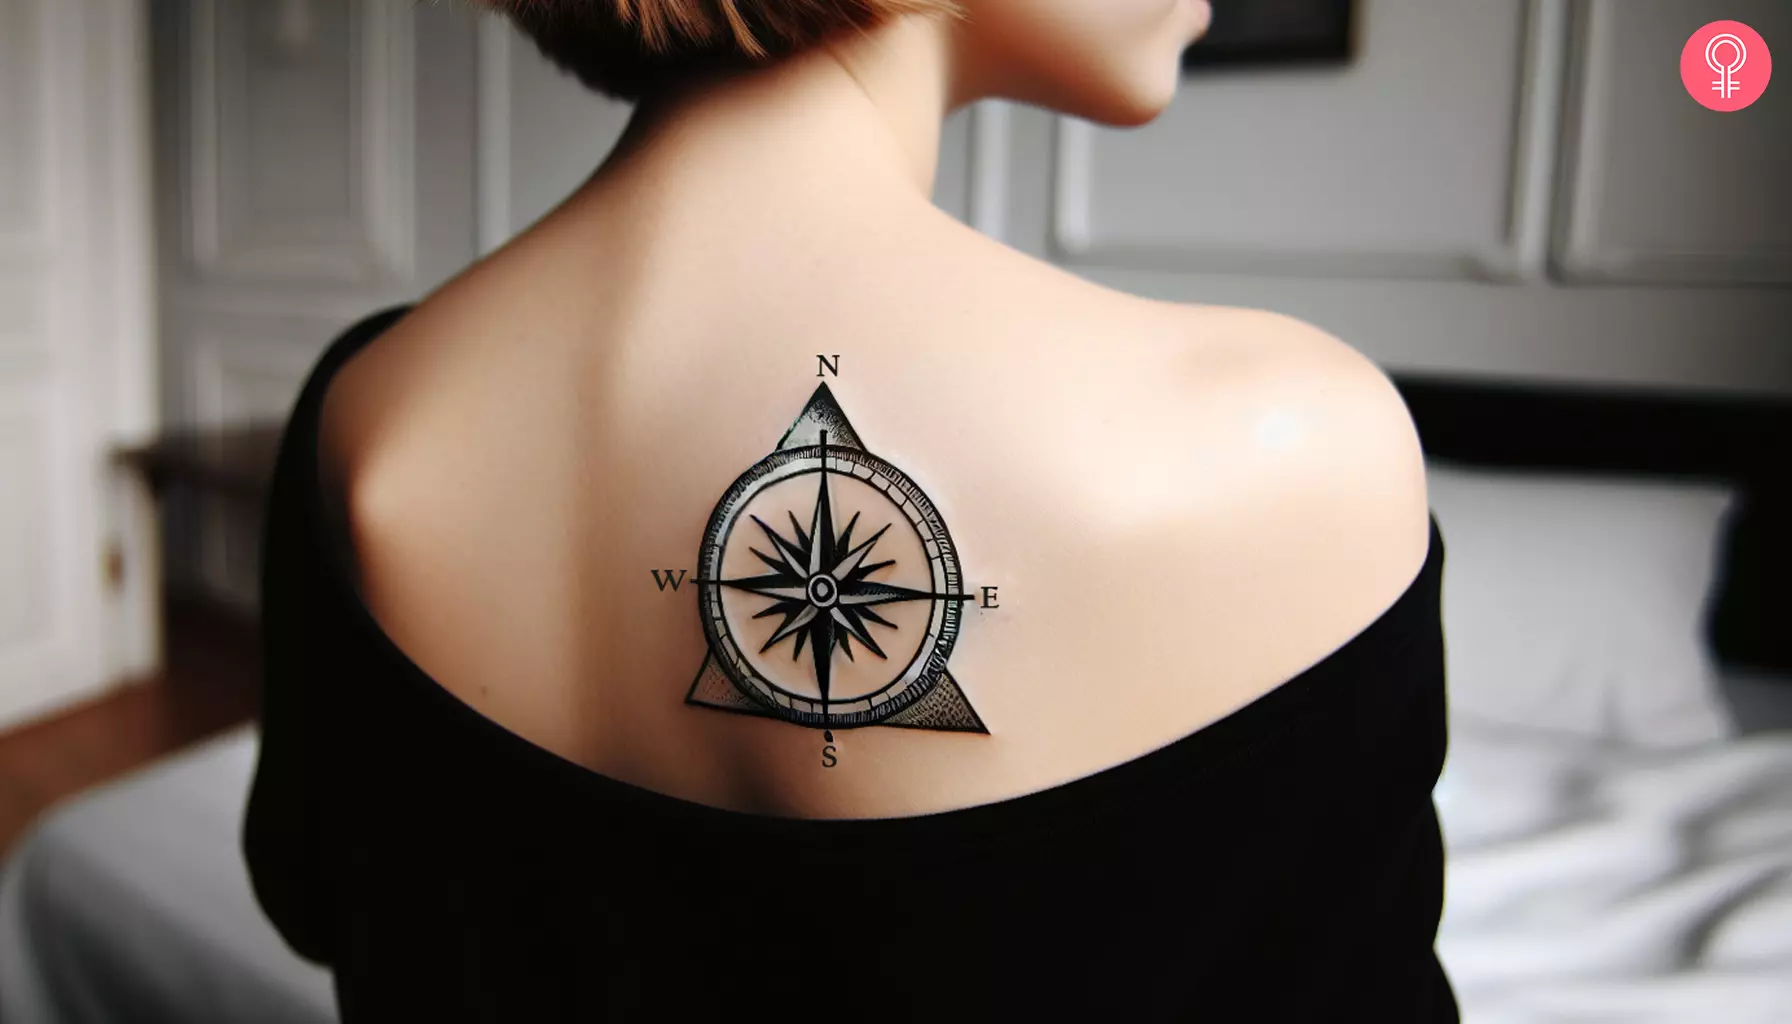 A woman with a triangle compass tattoo on her upper back